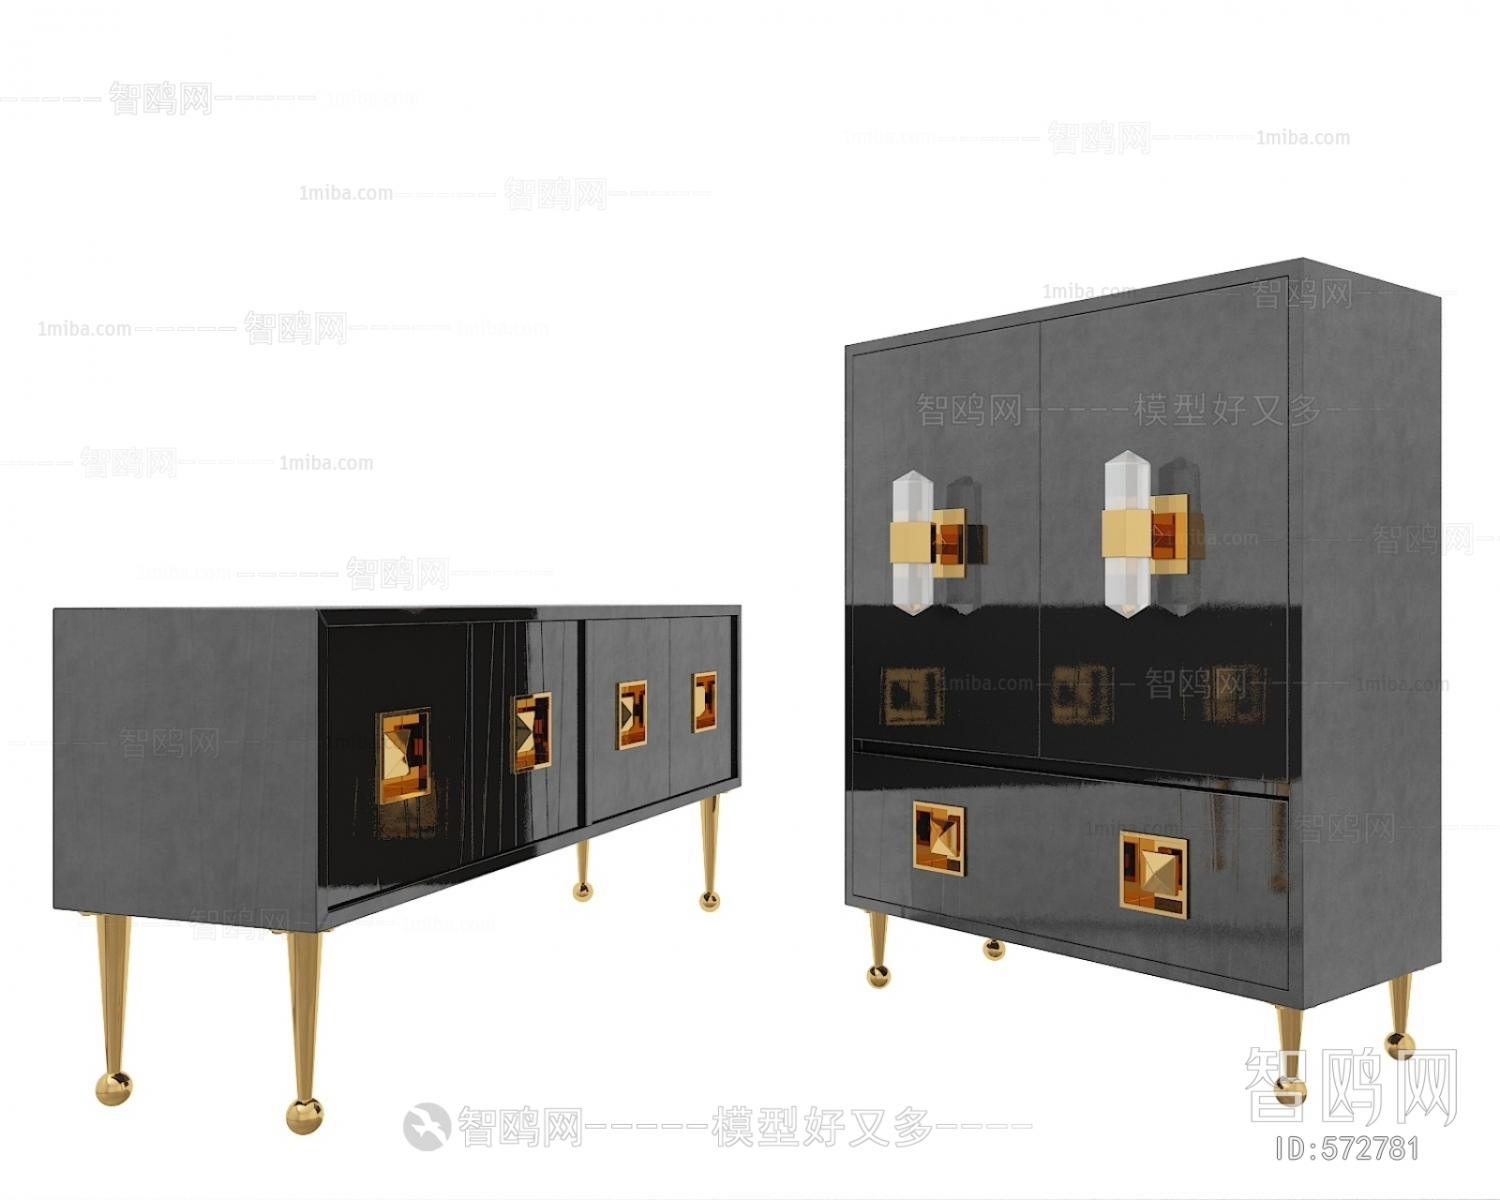 New Classical Style Decorative Cabinet